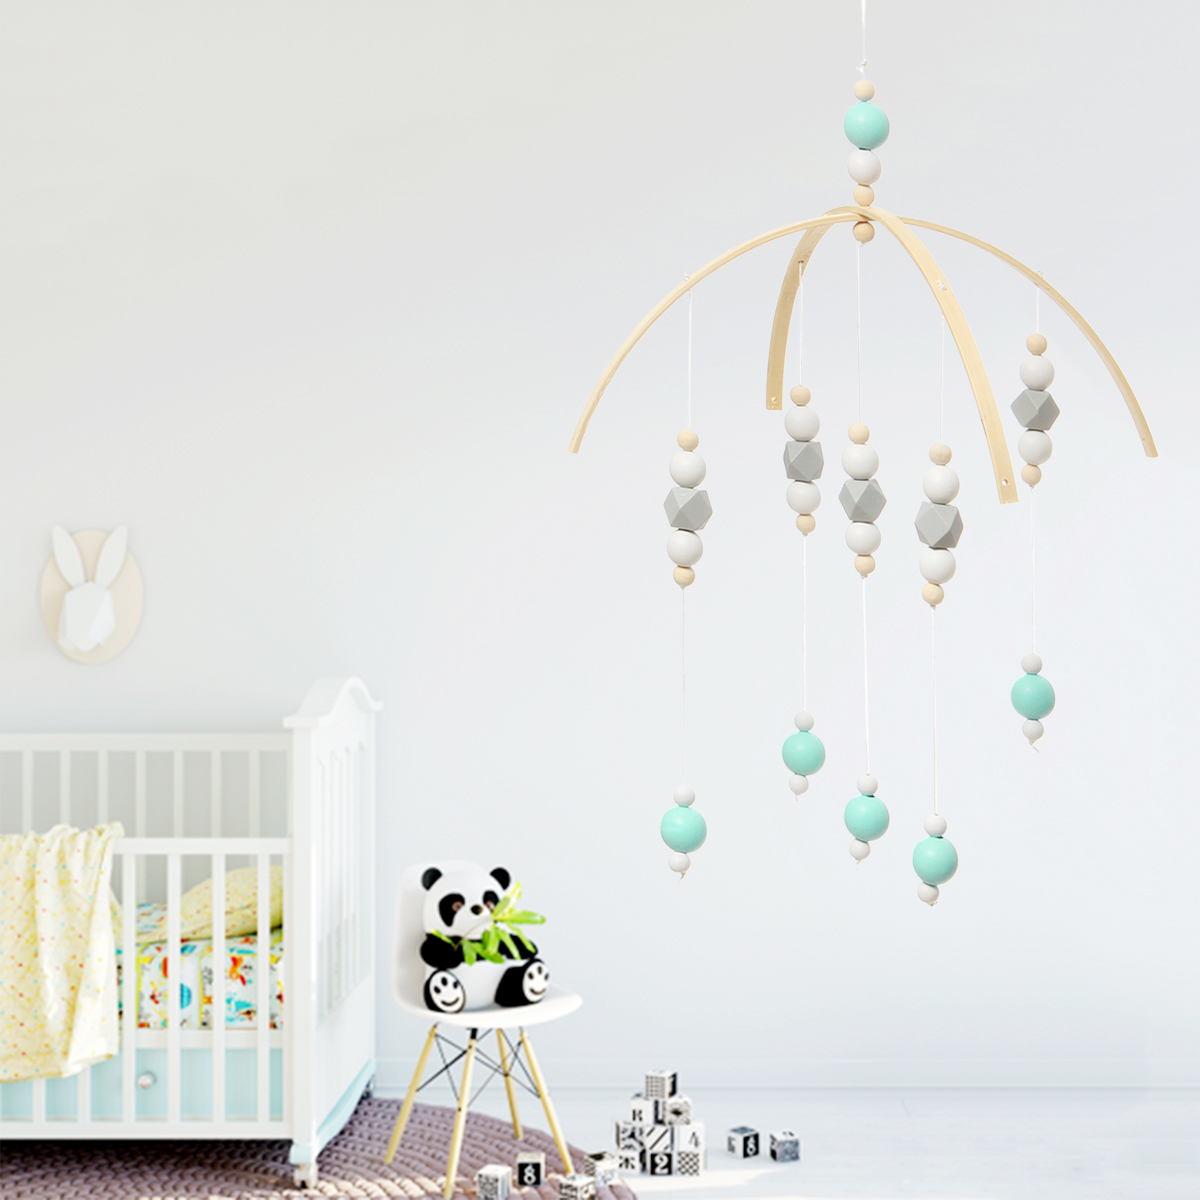 Wooden-Beads-Wind-Chimes-with-Wool-Balls-Baby-Bed-Hanging-Windbell-Crib-Tent-Kids-Room-Decorations-O-1906546-6